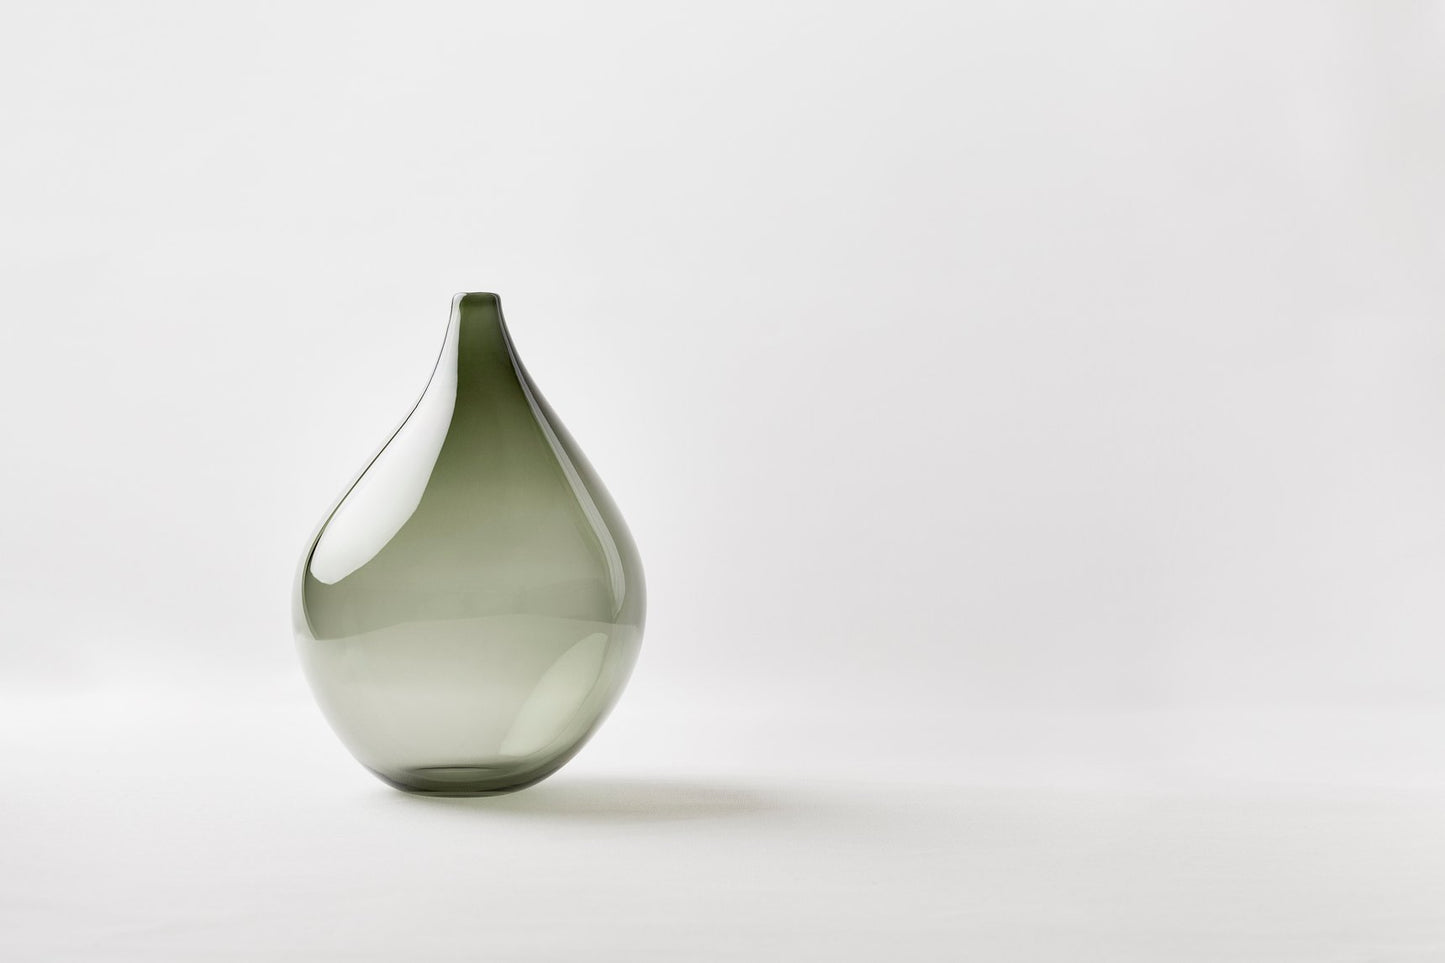 Outlet! Pulu vase, Tall green